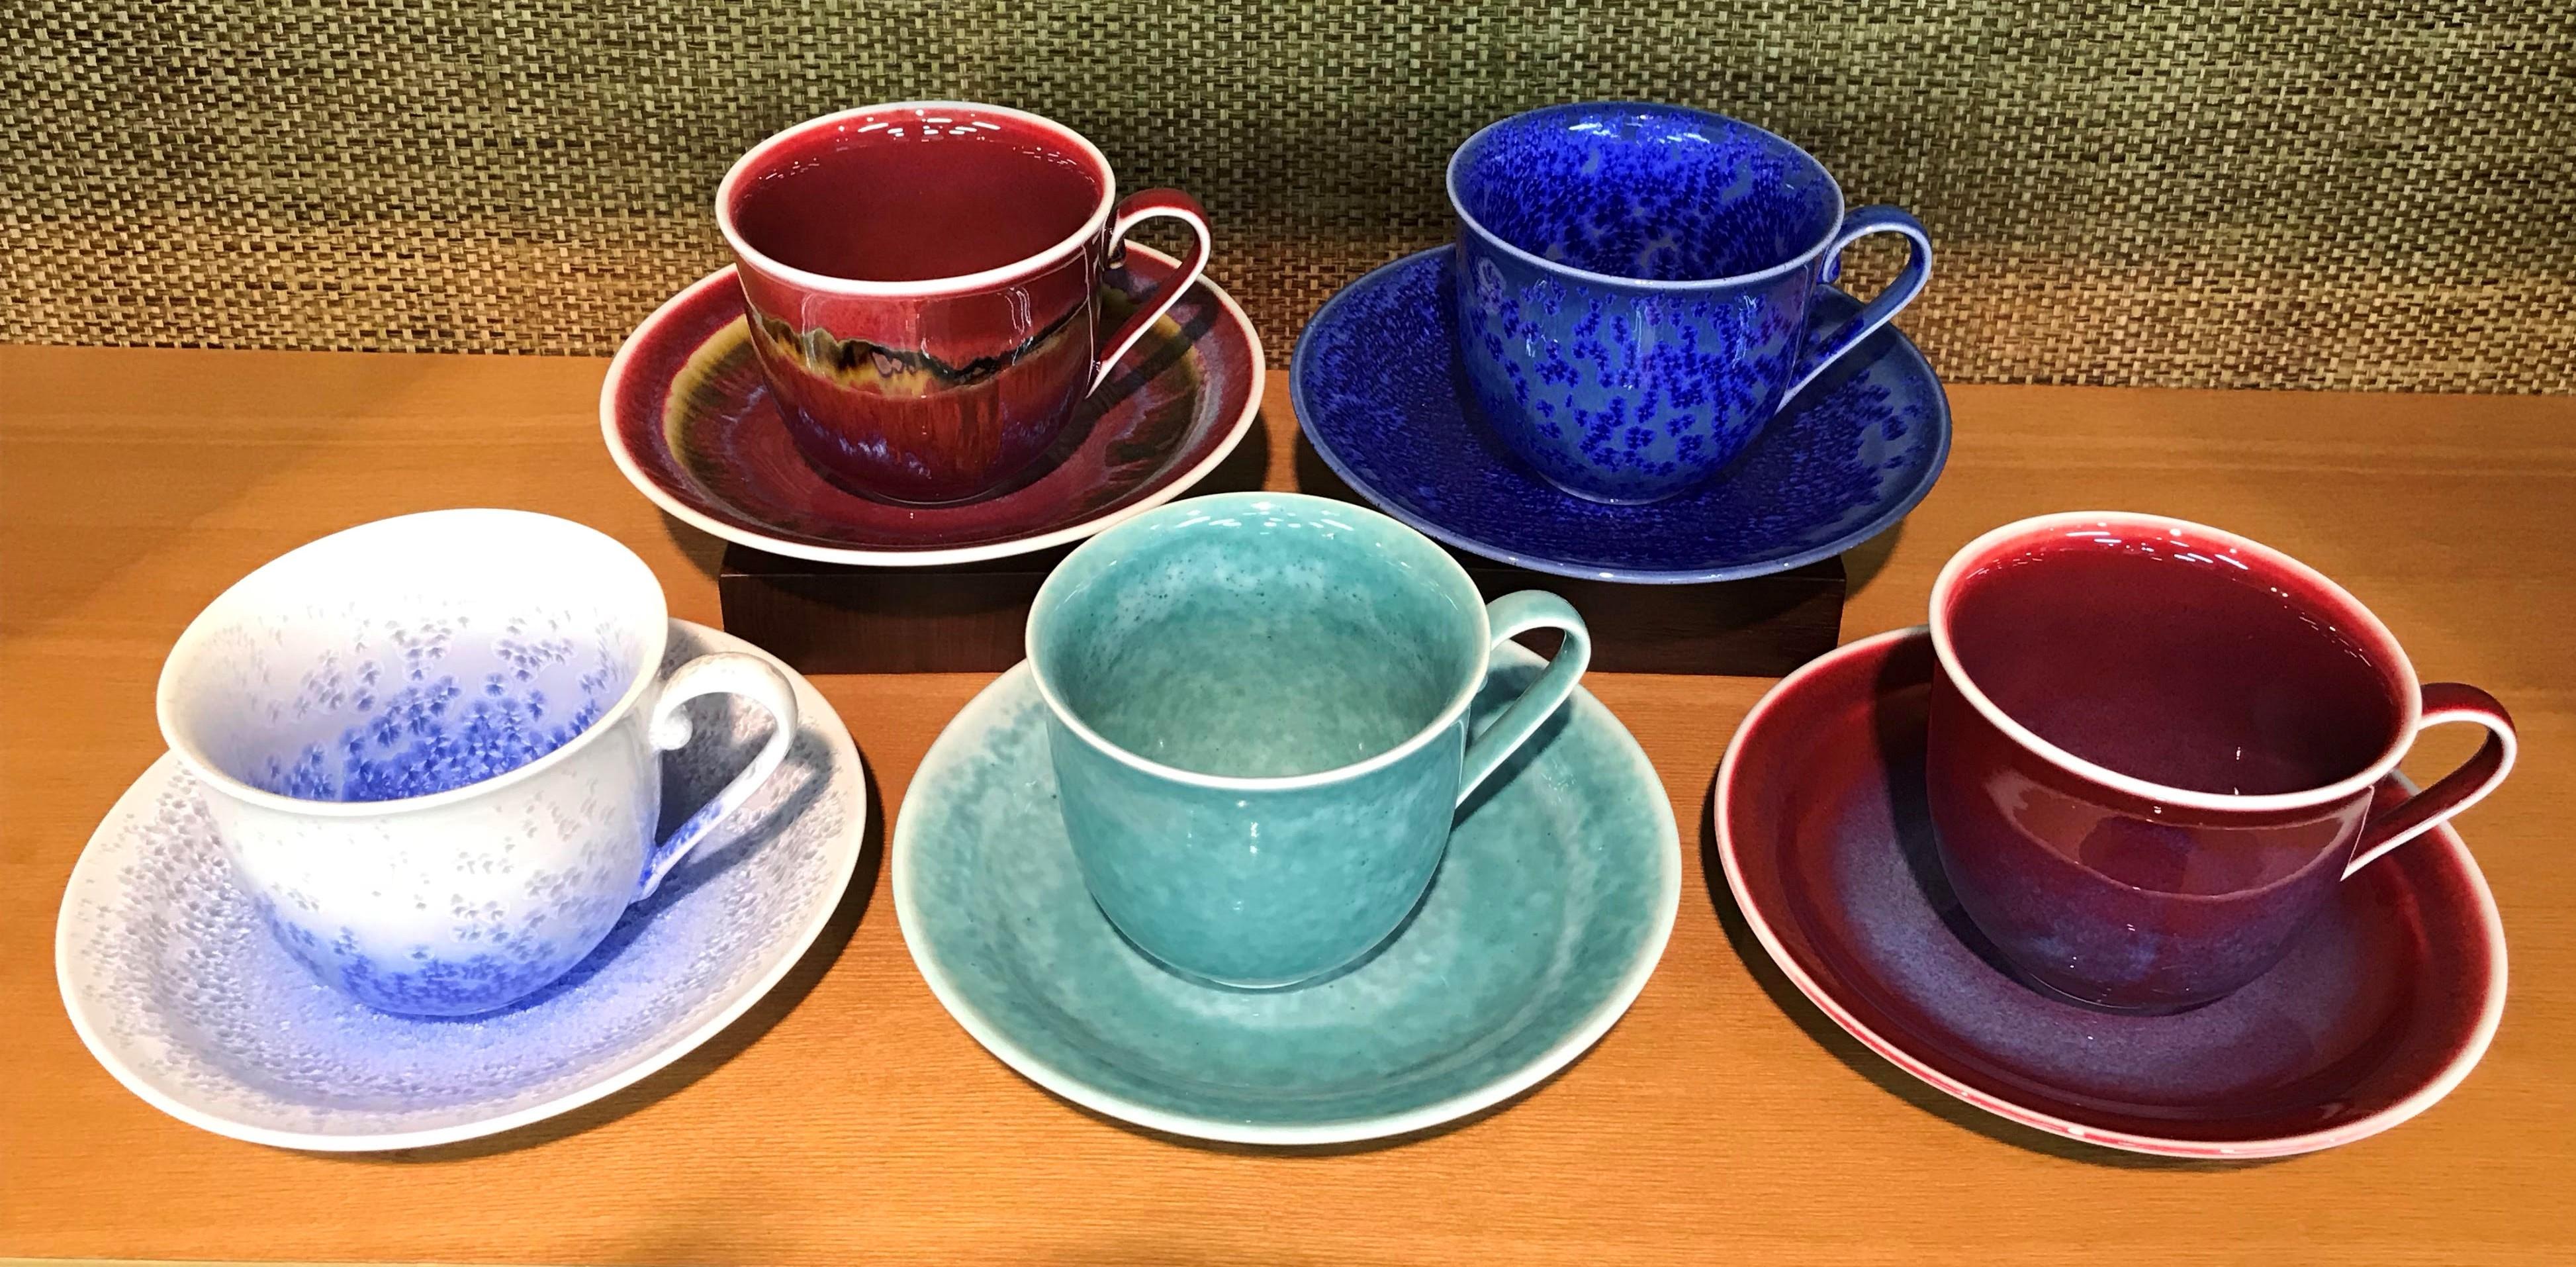 Stunning set of five contemporary Japanese hand-glazed porcelain cups and saucers in a beautiful shape masterfully glazed to showcase the artist's signature glazing techniques, signed works by widely respected award-winning master porcelain artist